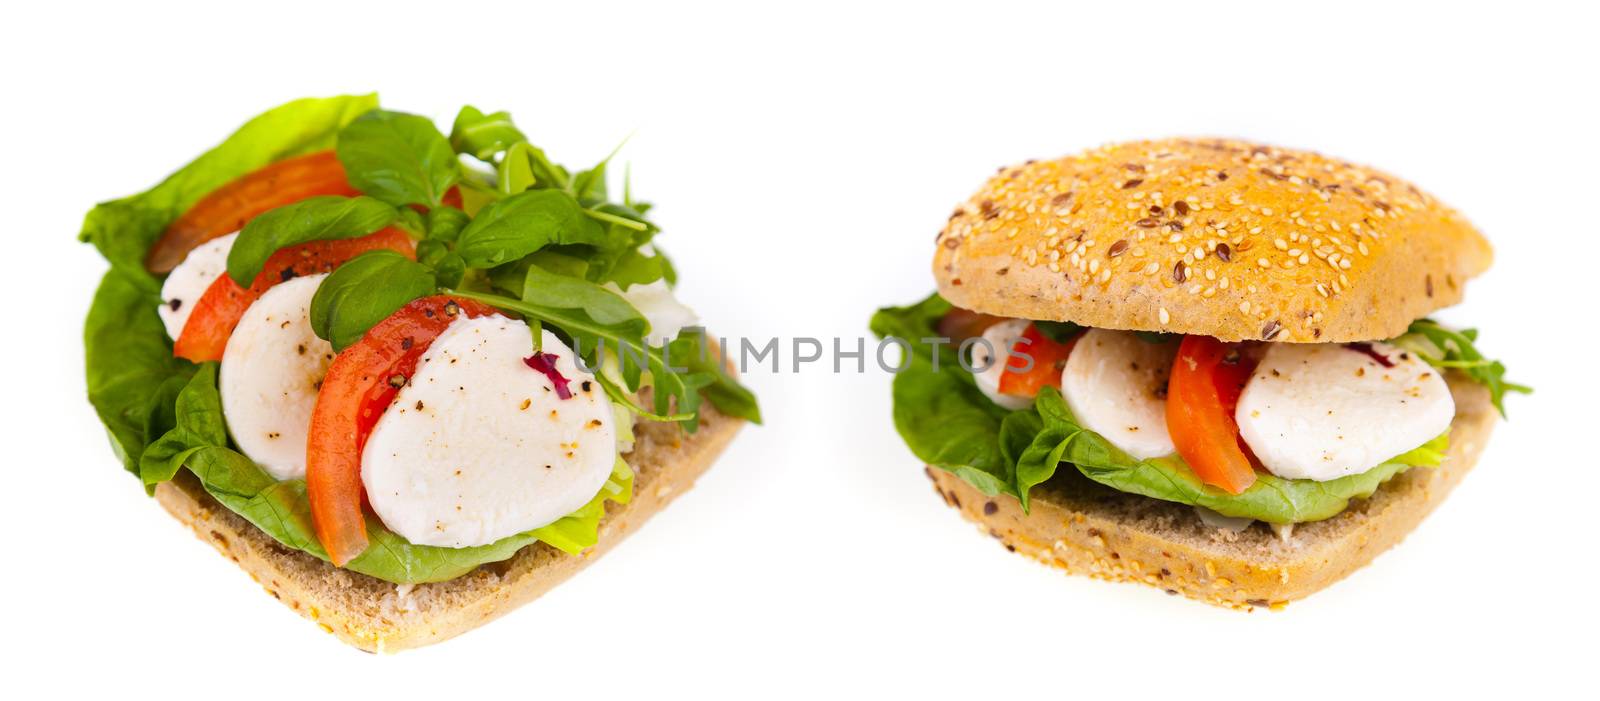 Delicious and healthy sandwich - two photos isolated on white